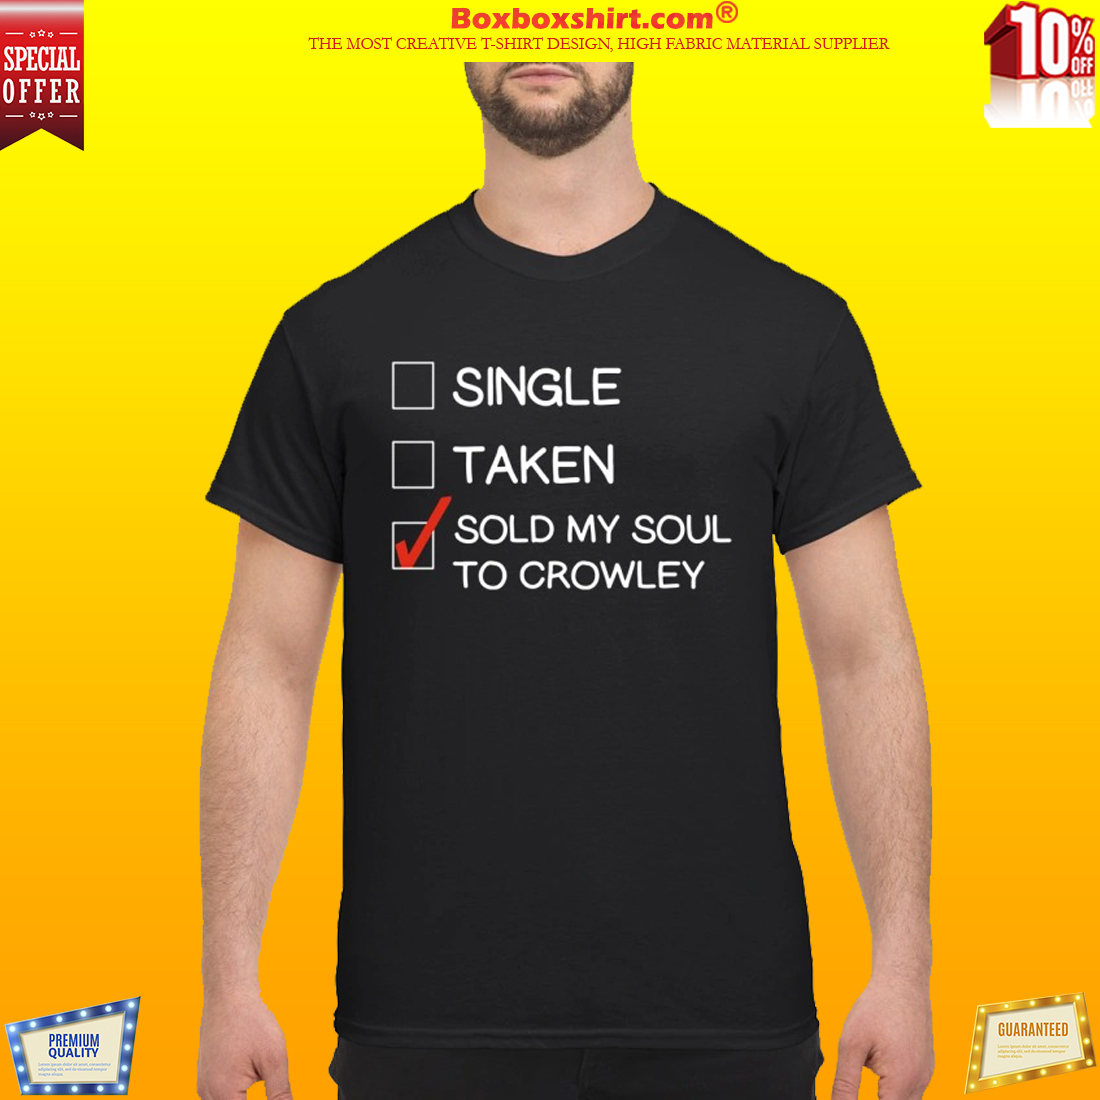 Single taken sold my soul to crowley and classic shirt